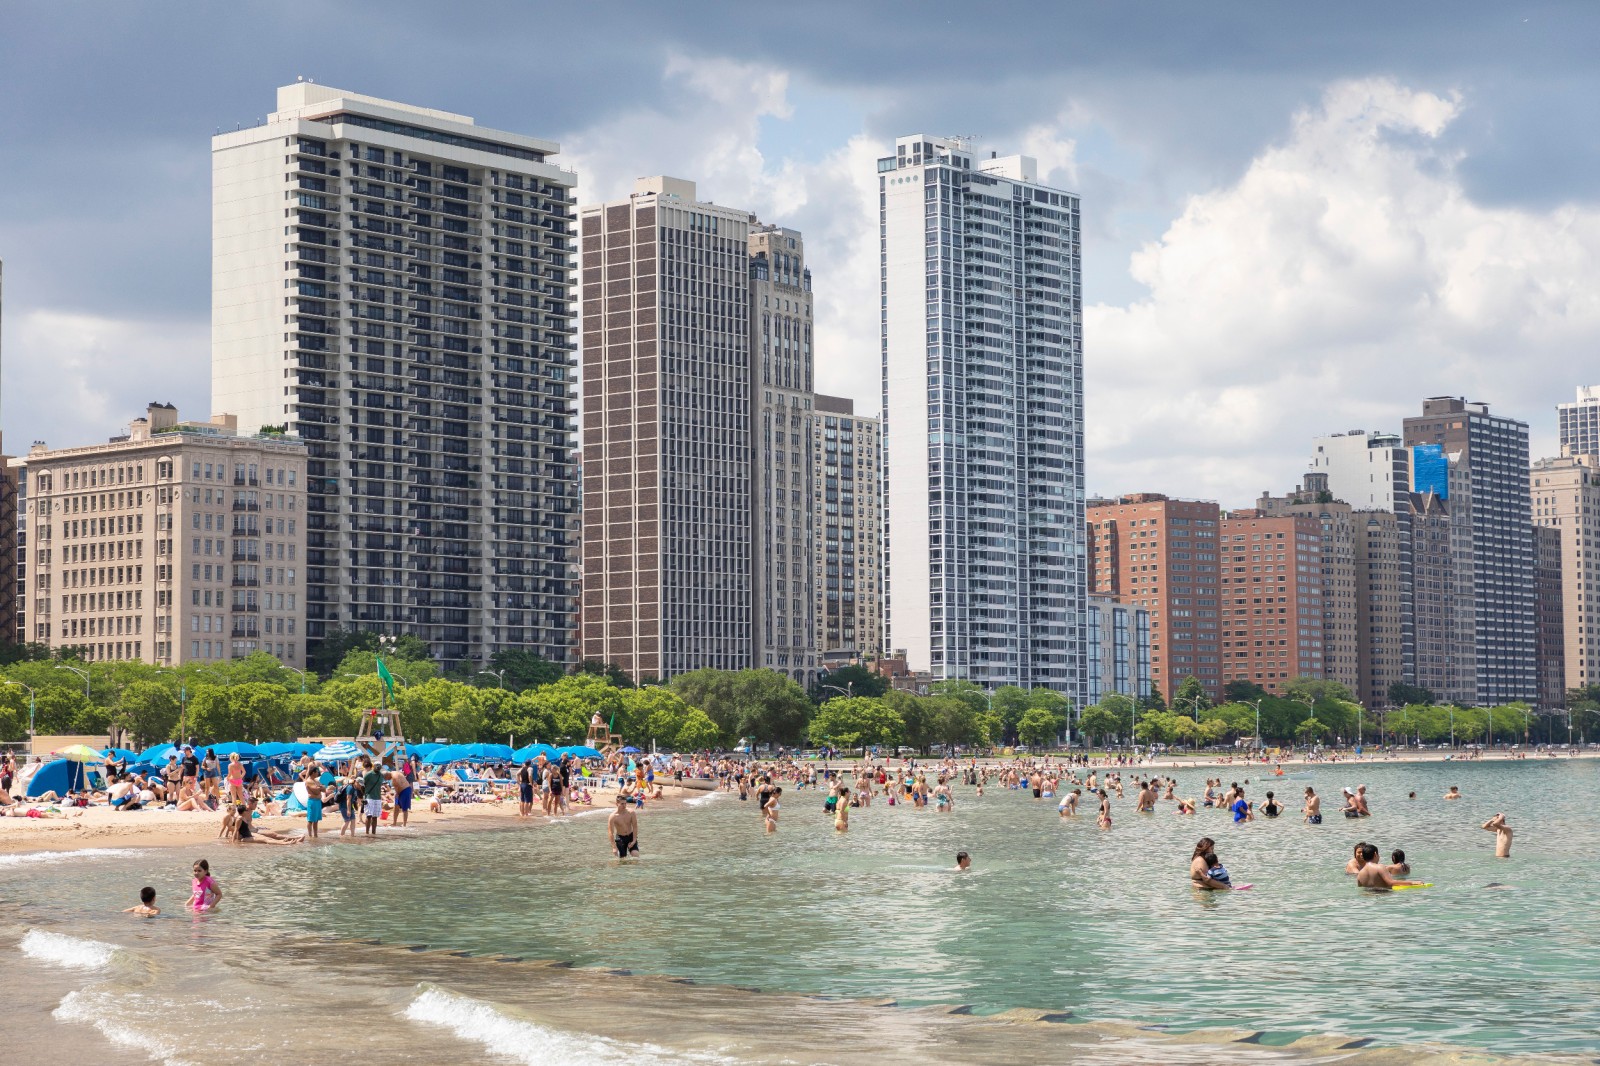 About nude beaches in Chicago